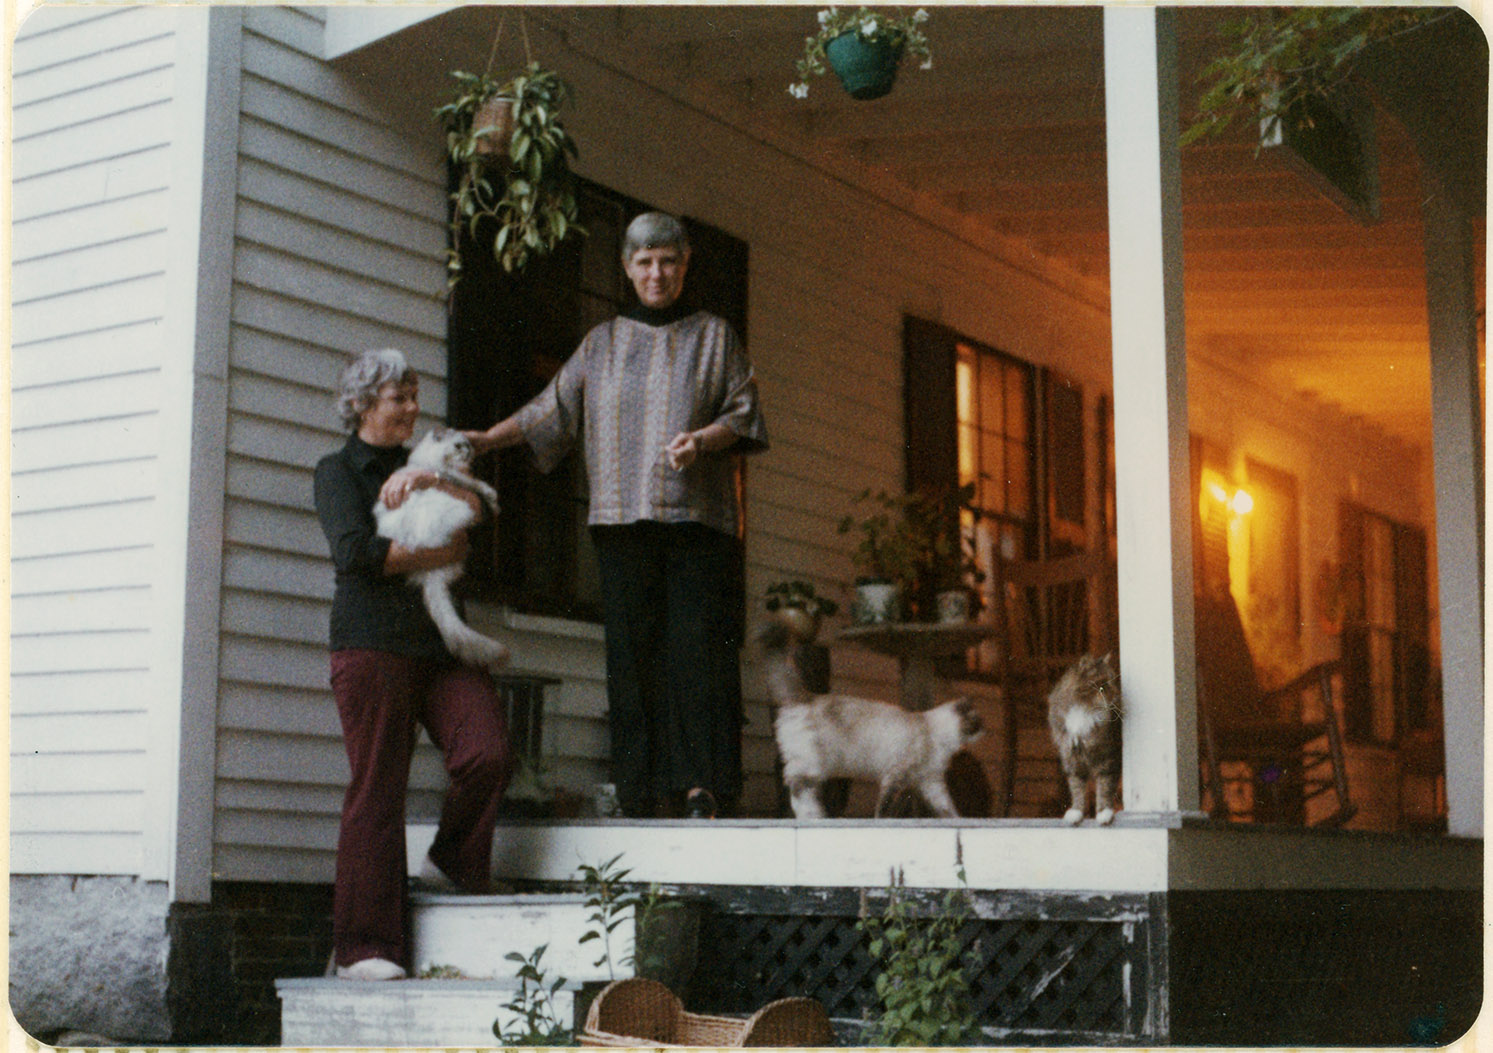 Depiction of Abramson, Johnson, and cats on the porch of their New Salem home, 1977